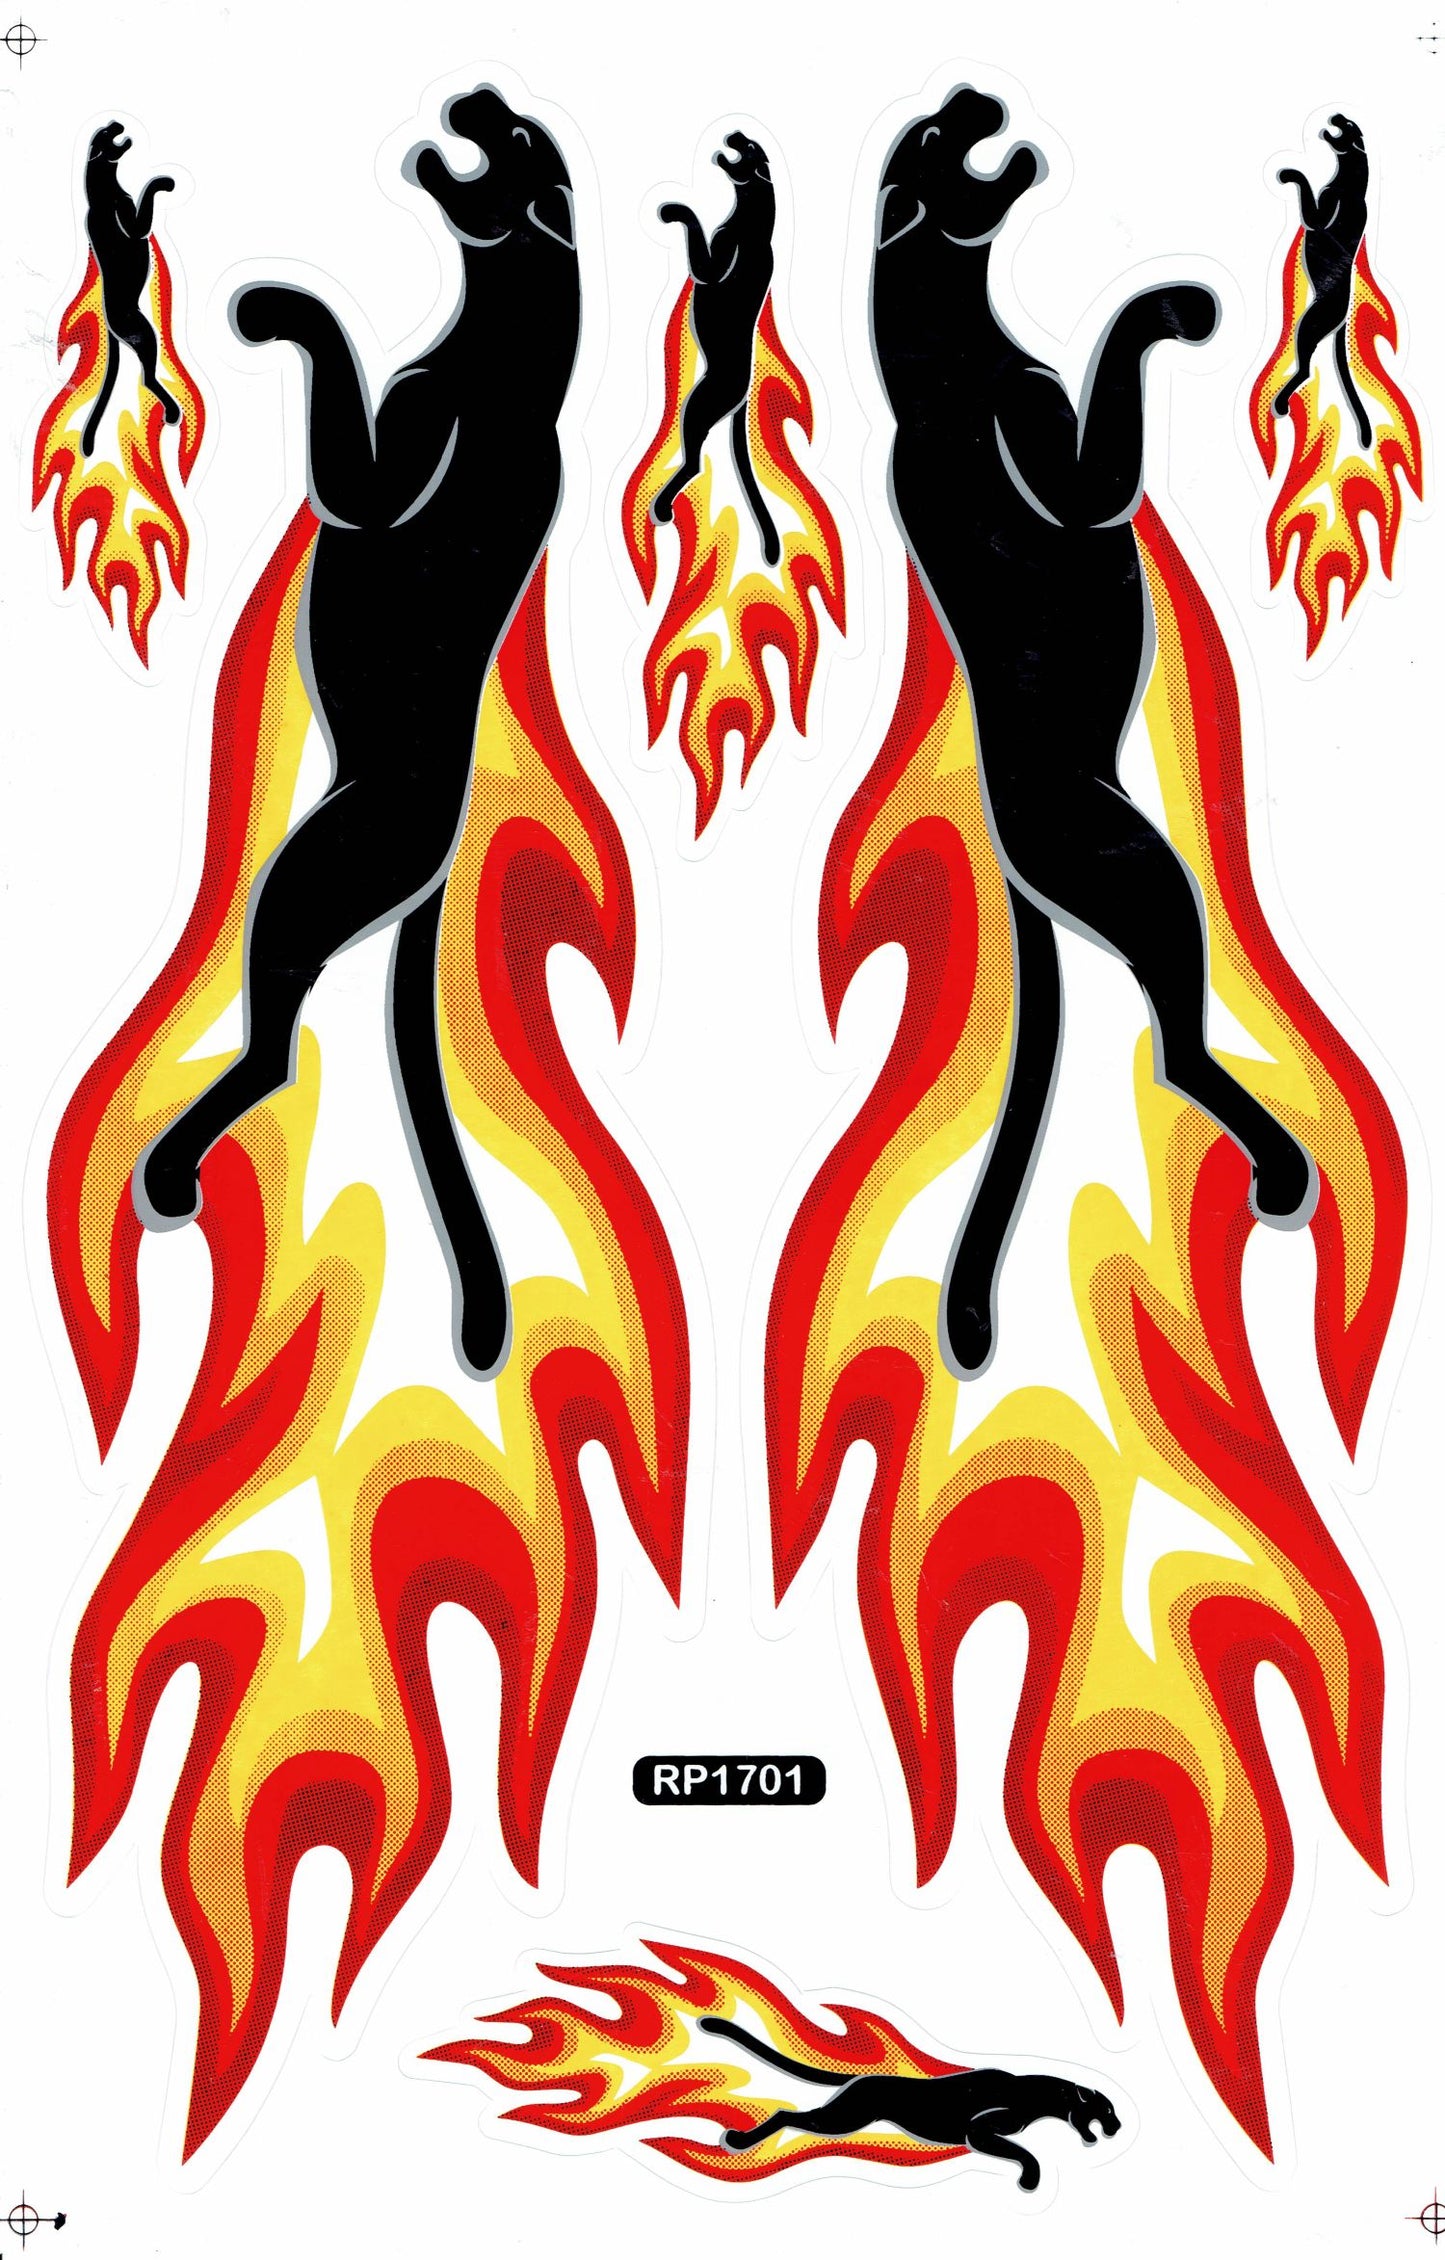 Panther flames fire orange sticker motorcycle scooter skateboard car tuning model building self-adhesive 310